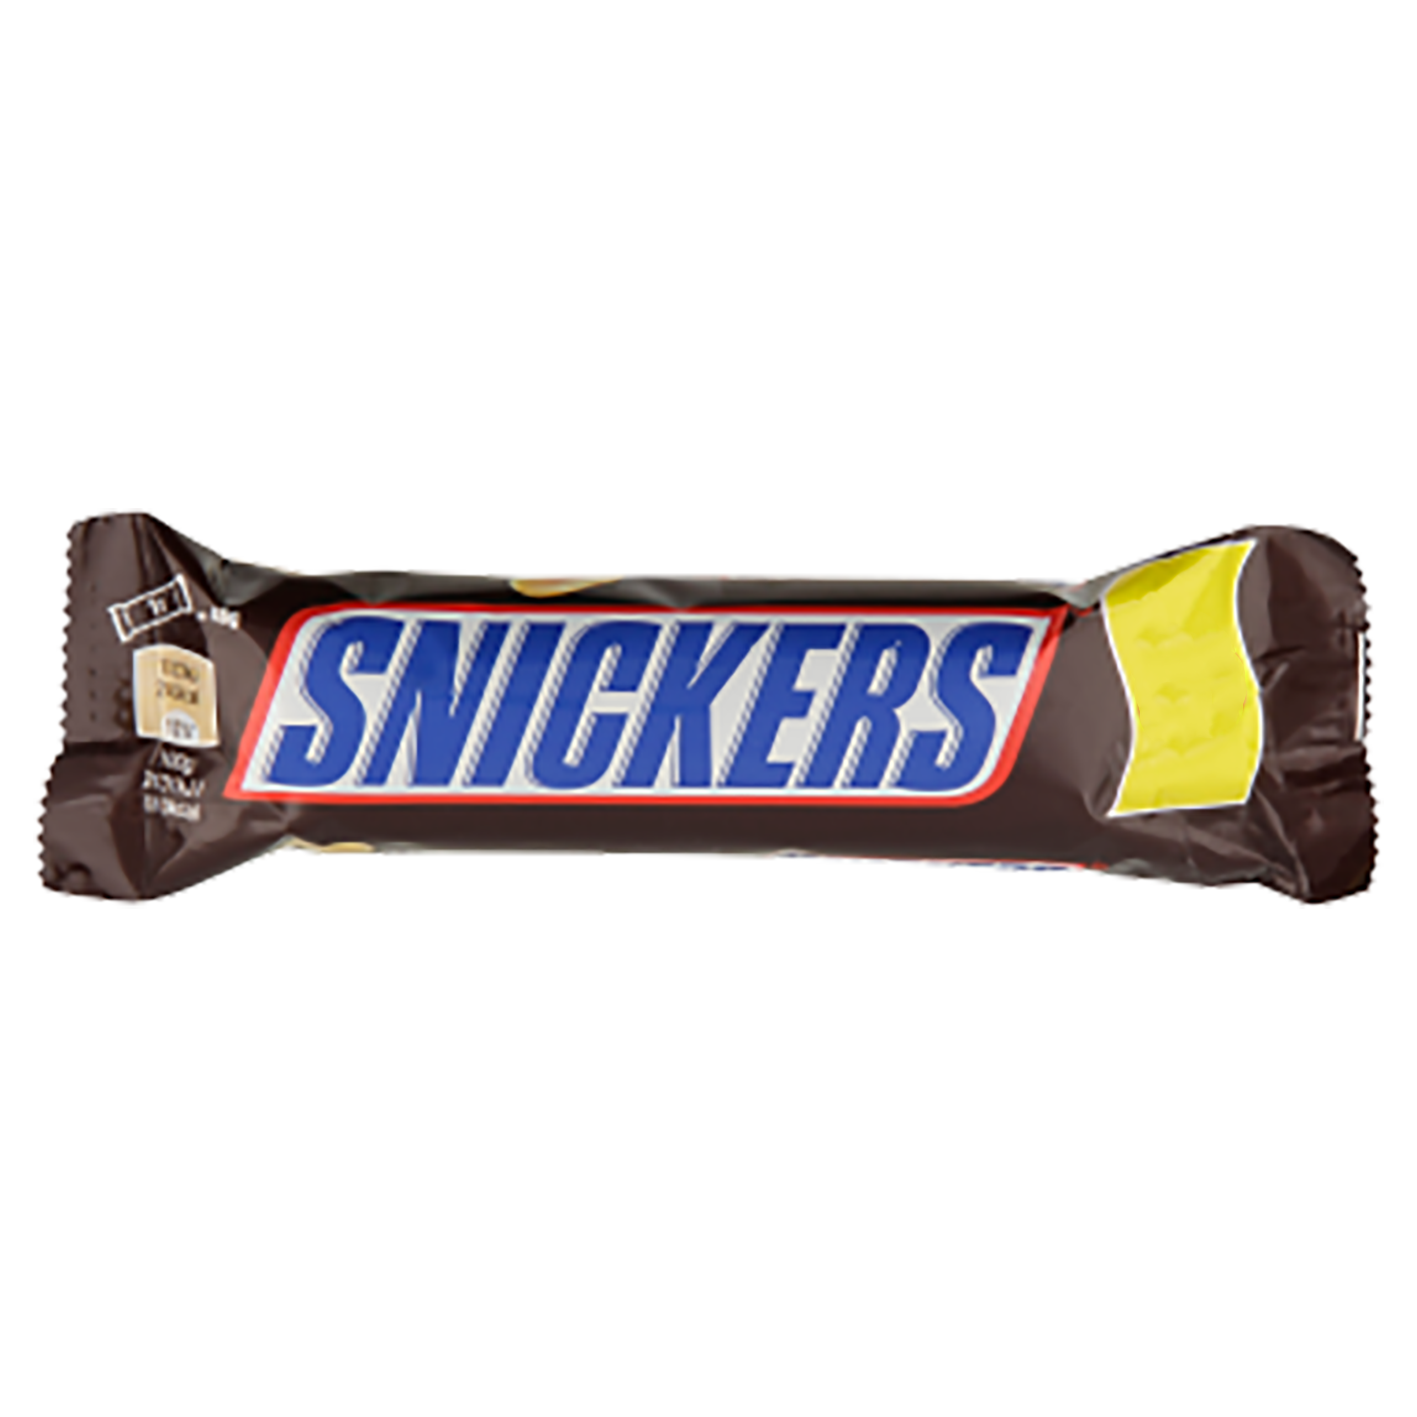 Snickers Bar PNG HD Quality